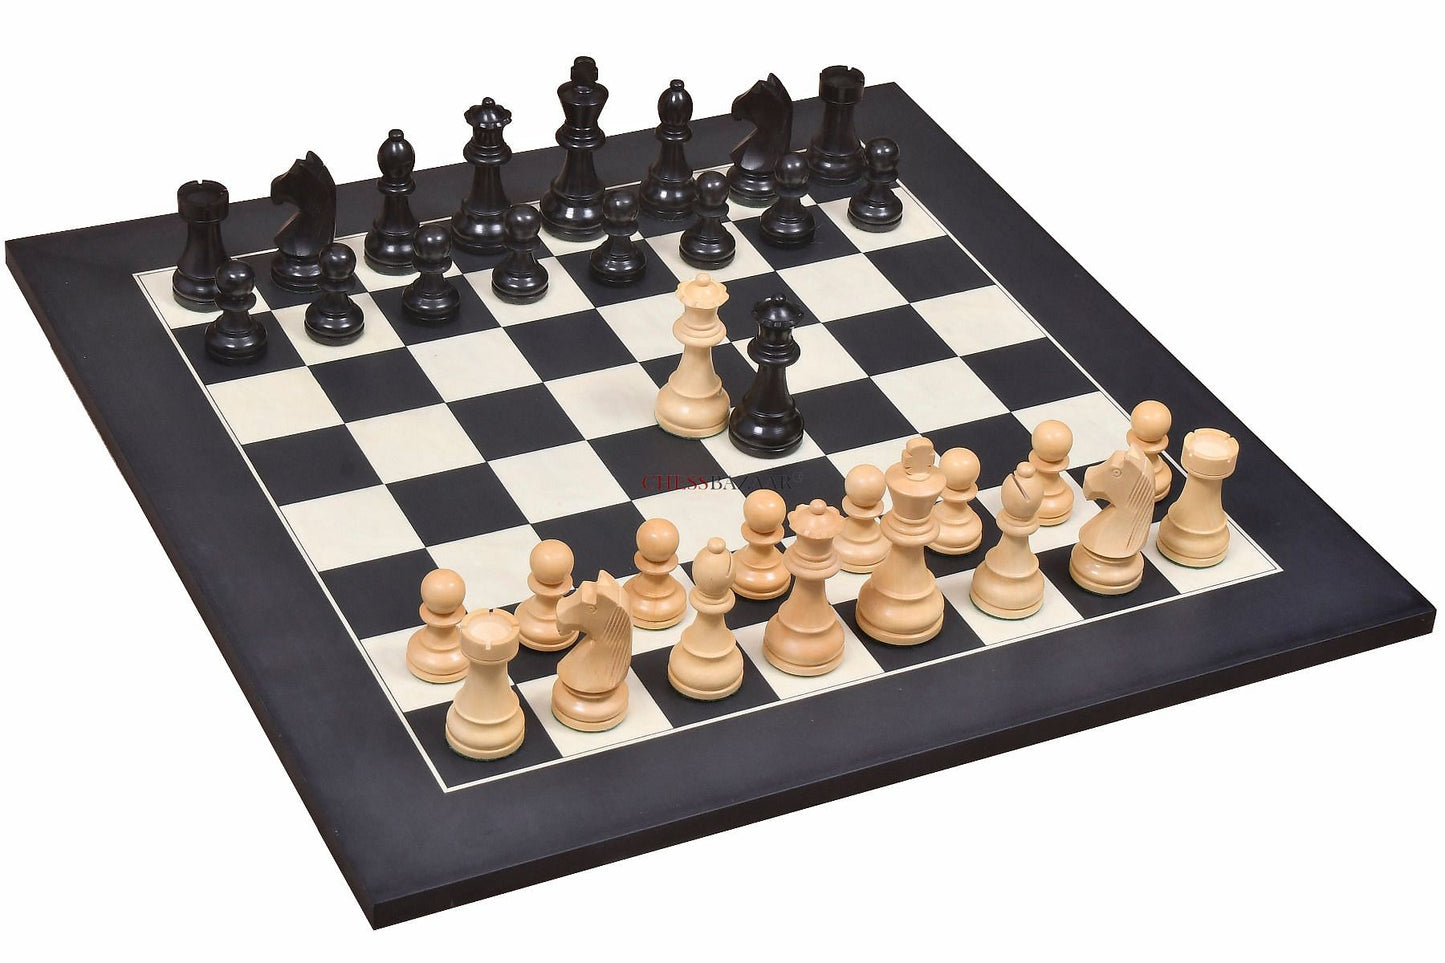 Tournament Series Championship Chess Pieces with German Knight in Ebonized Boxwood & Natural Boxwood - 3.75" King